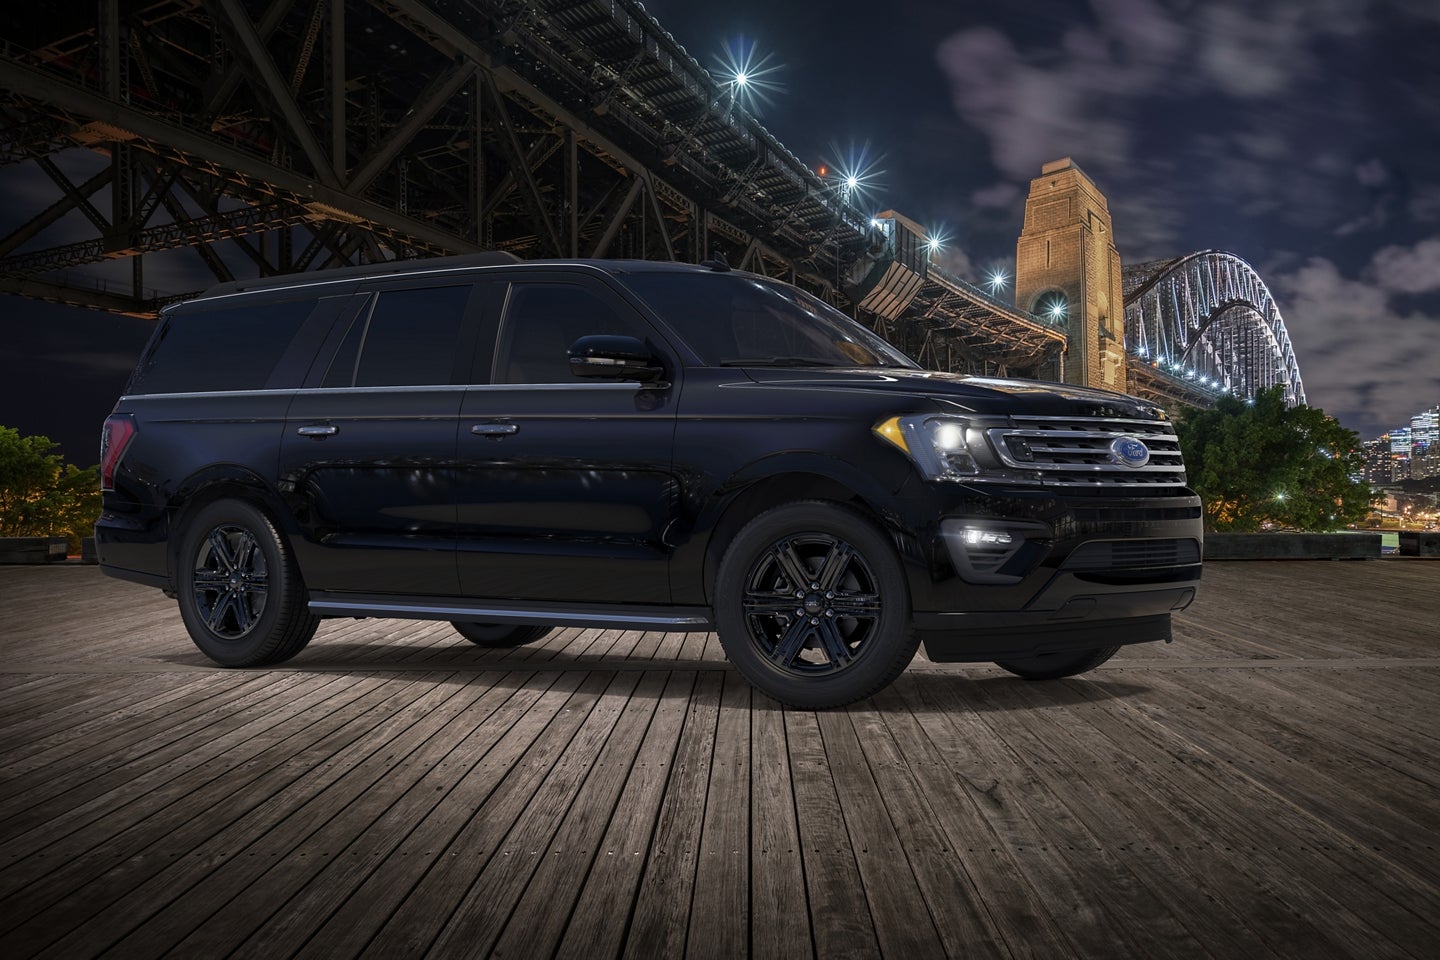 2020 Ford Expedition Key Features near Enterprise, AL